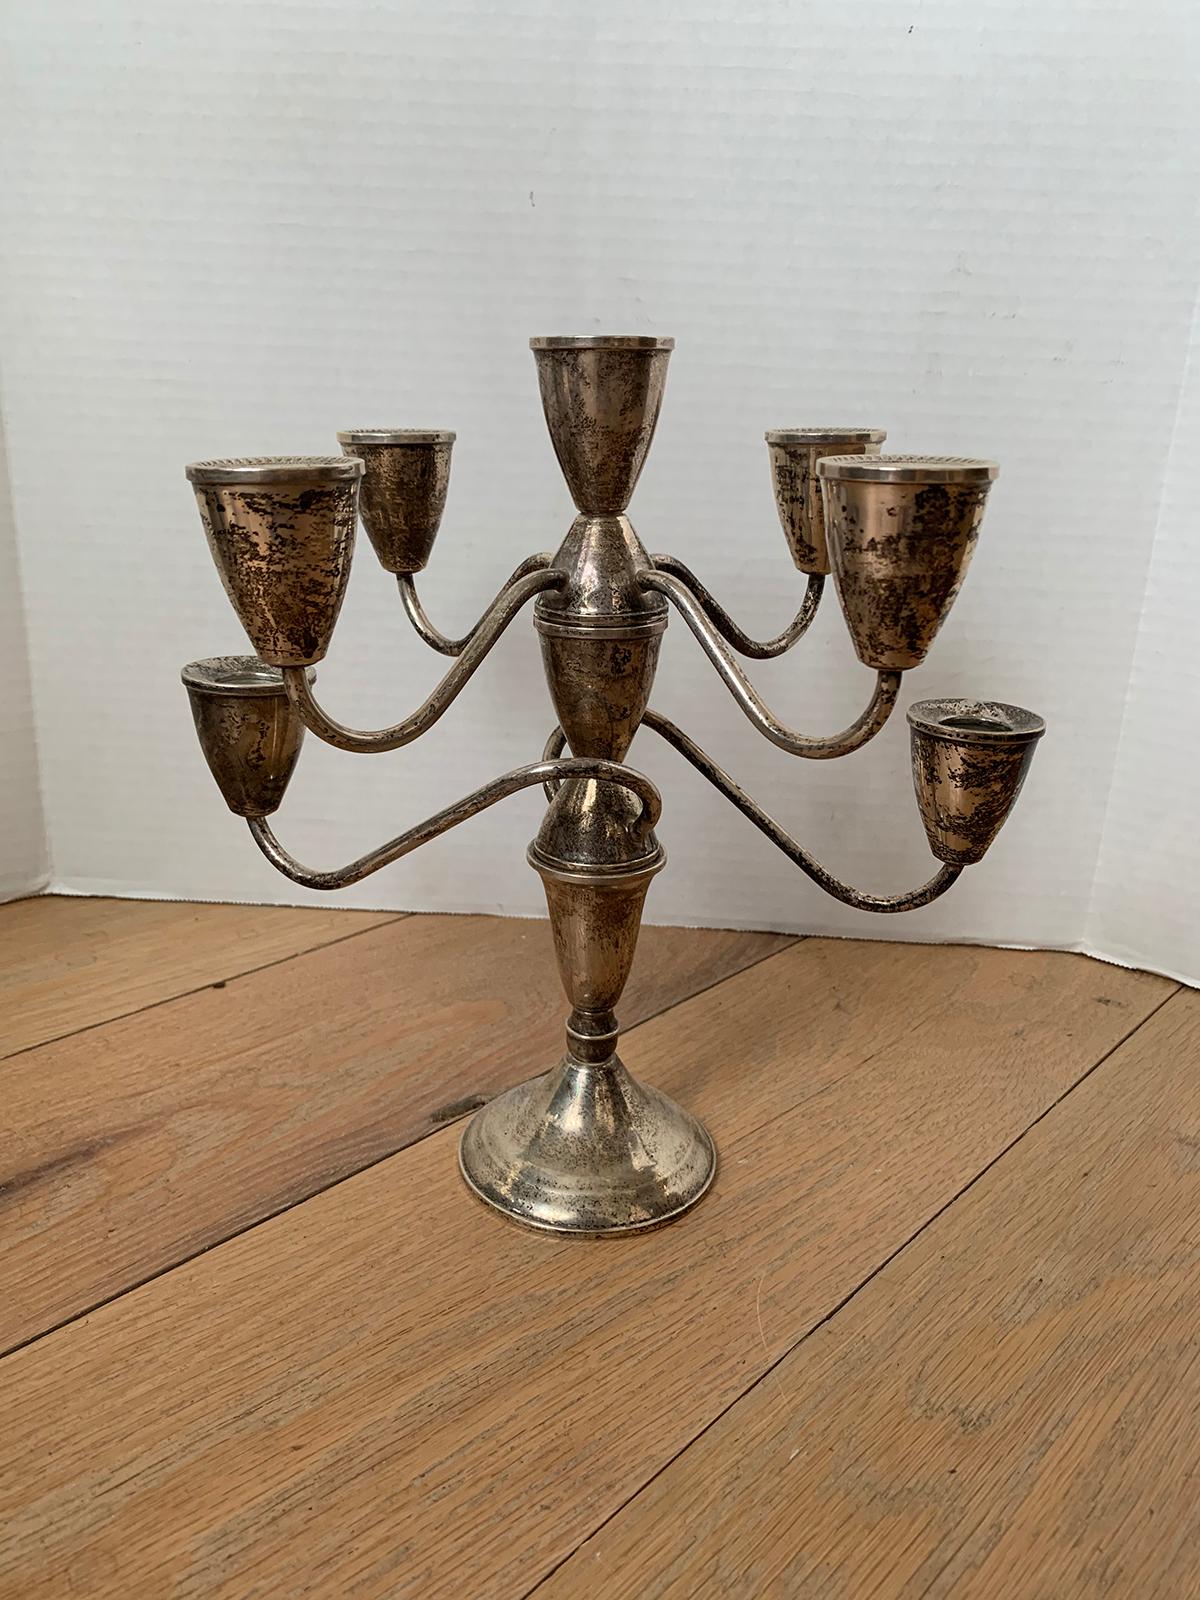 20th century circa 1940s-1950s American weighted sterling silver seven-arm candelabra by Dutchin Creations, stamped.